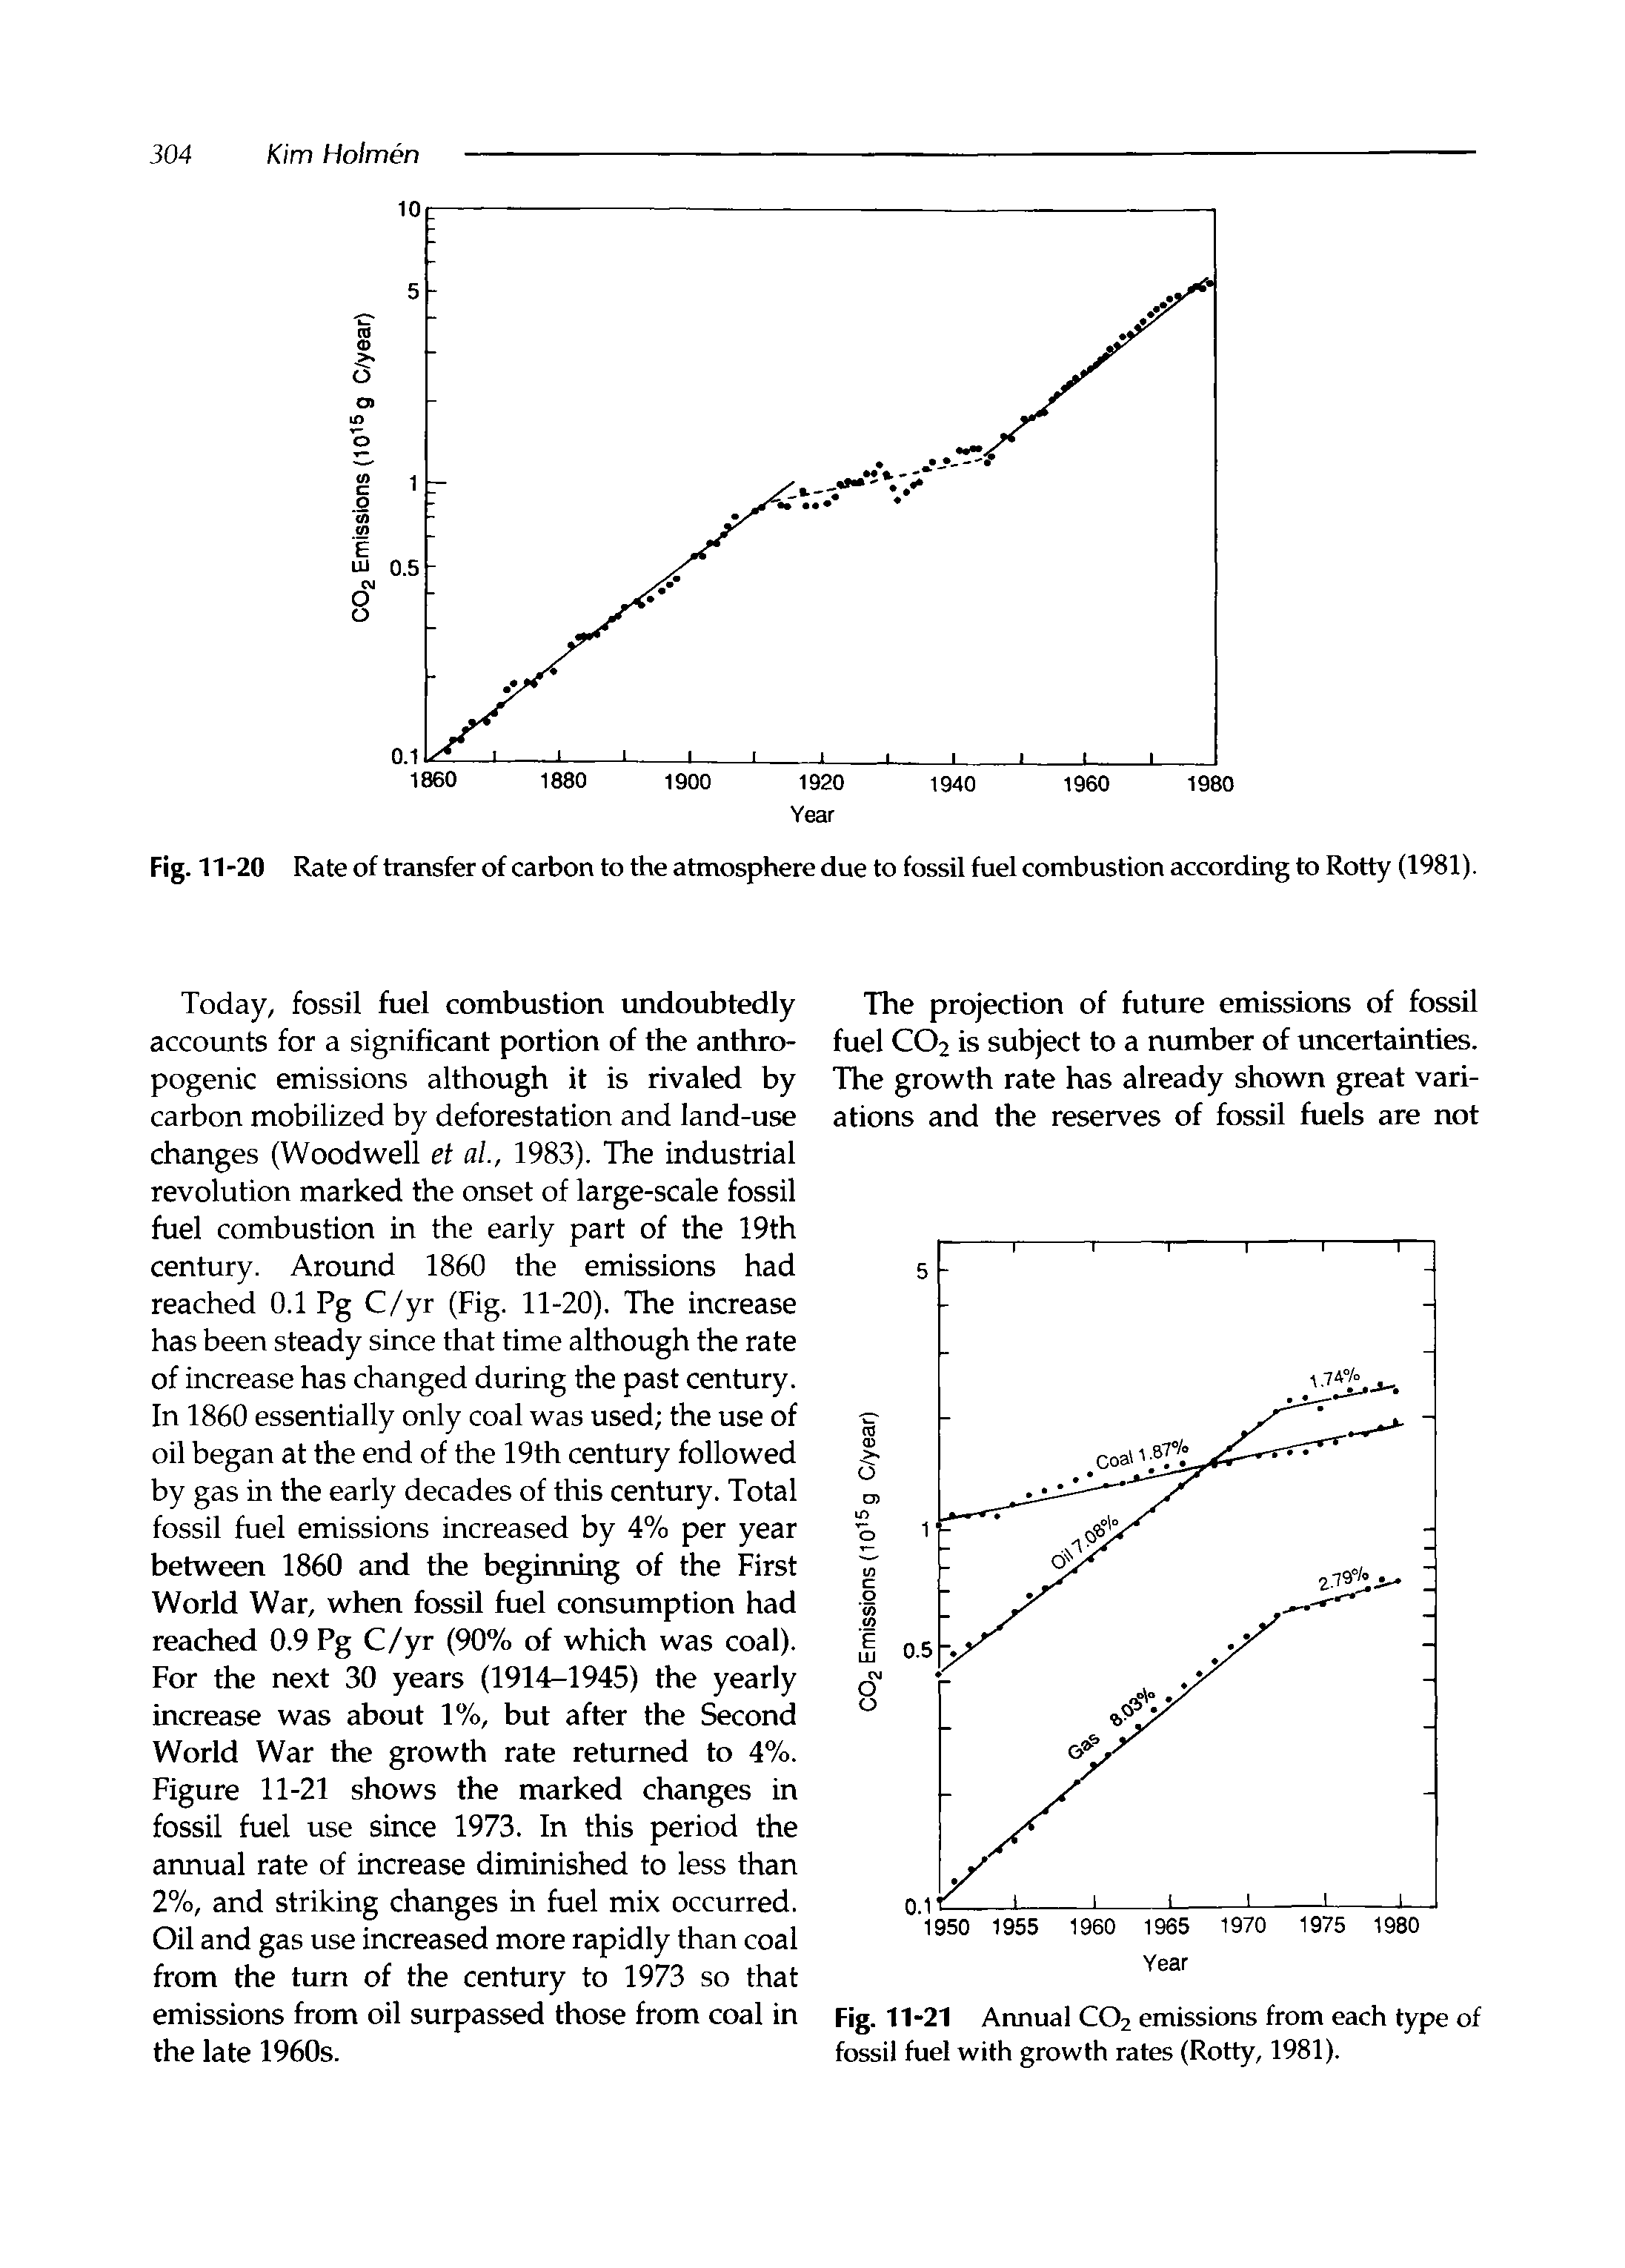 Fig. 11-20 Rate of transfer of carbon to the atmosphere due to fossil fuel combustion according to Rotty (1981).